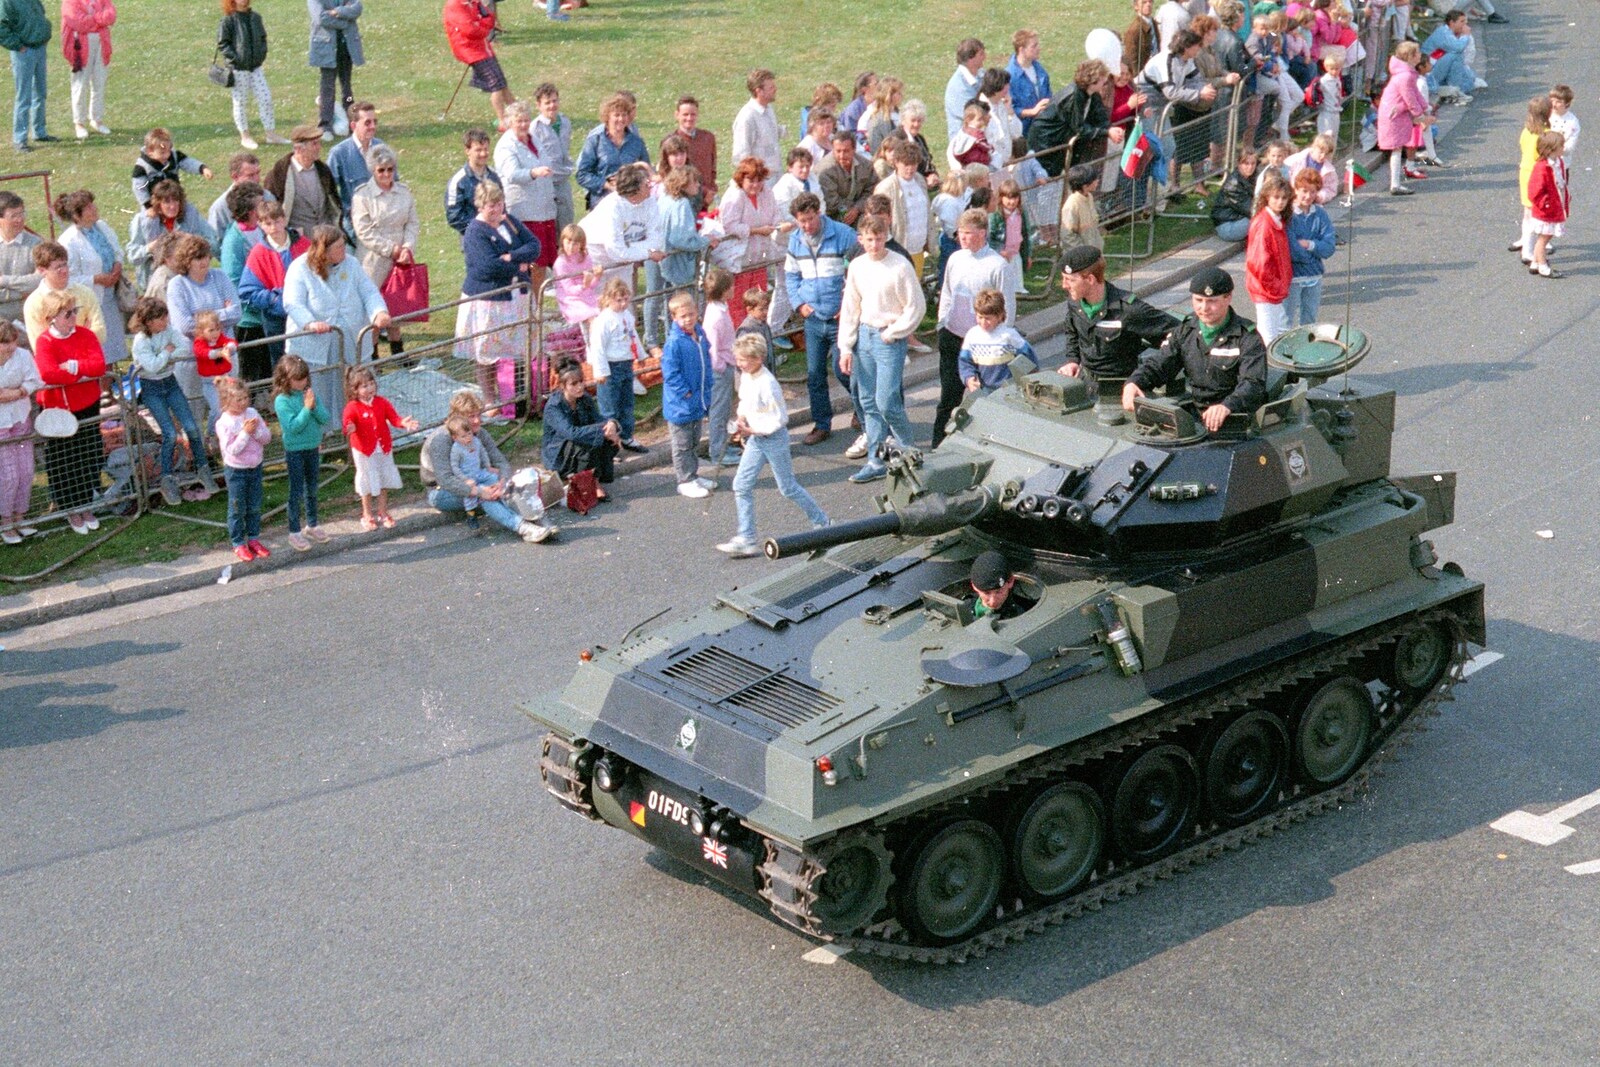 A Scorpion tank does Derry's Cross from Chantal and Andy's Wedding, and the Lord Mayor's Parade, Plymouth - 20th May 1987